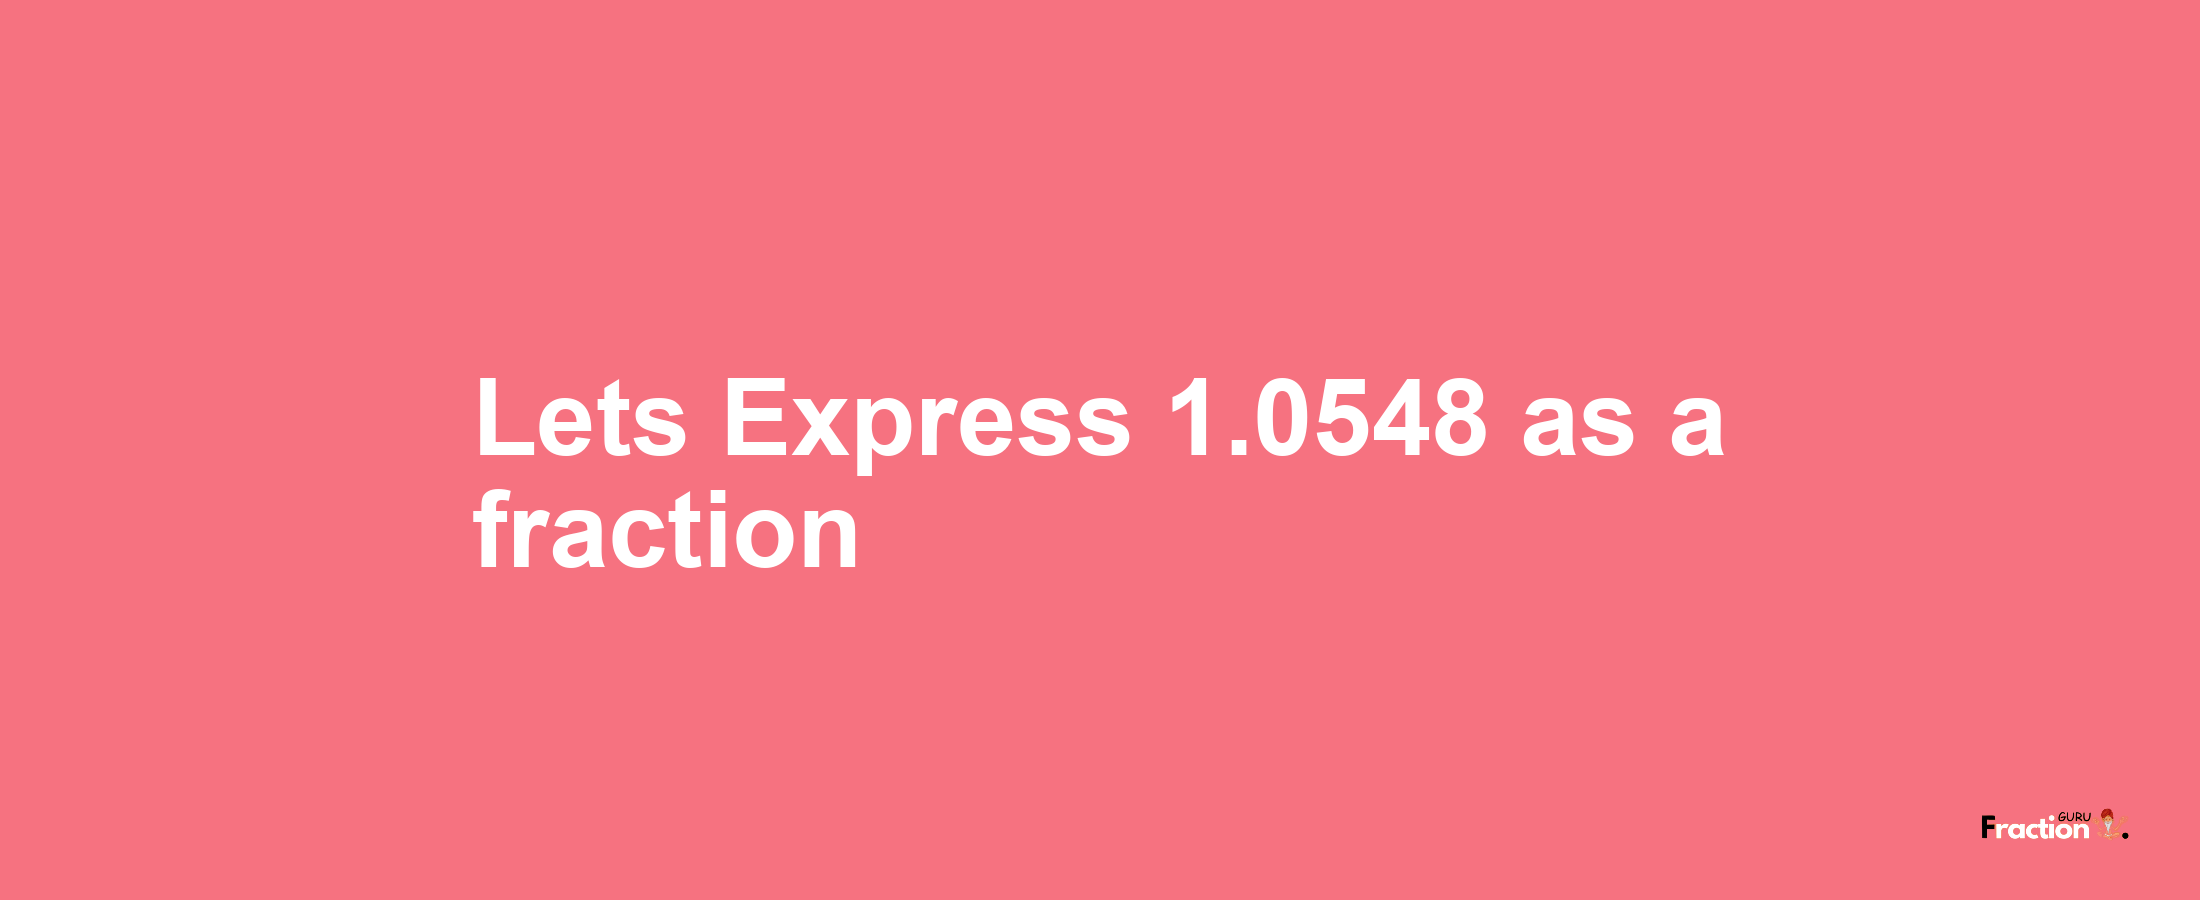 Lets Express 1.0548 as afraction